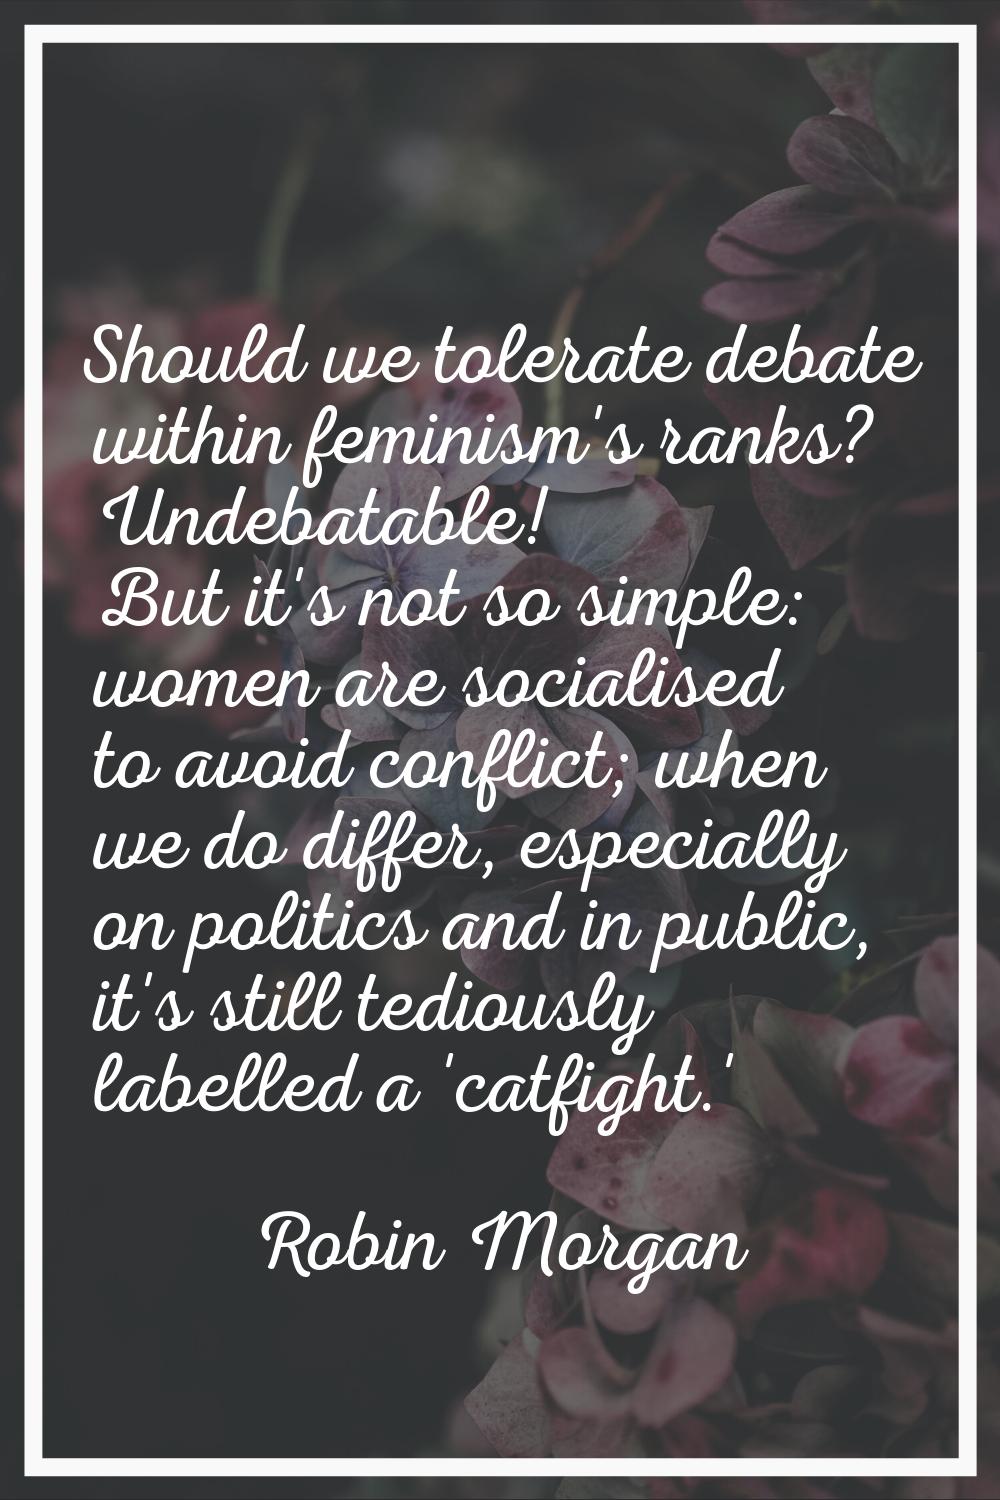 Should we tolerate debate within feminism's ranks? Undebatable! But it's not so simple: women are s